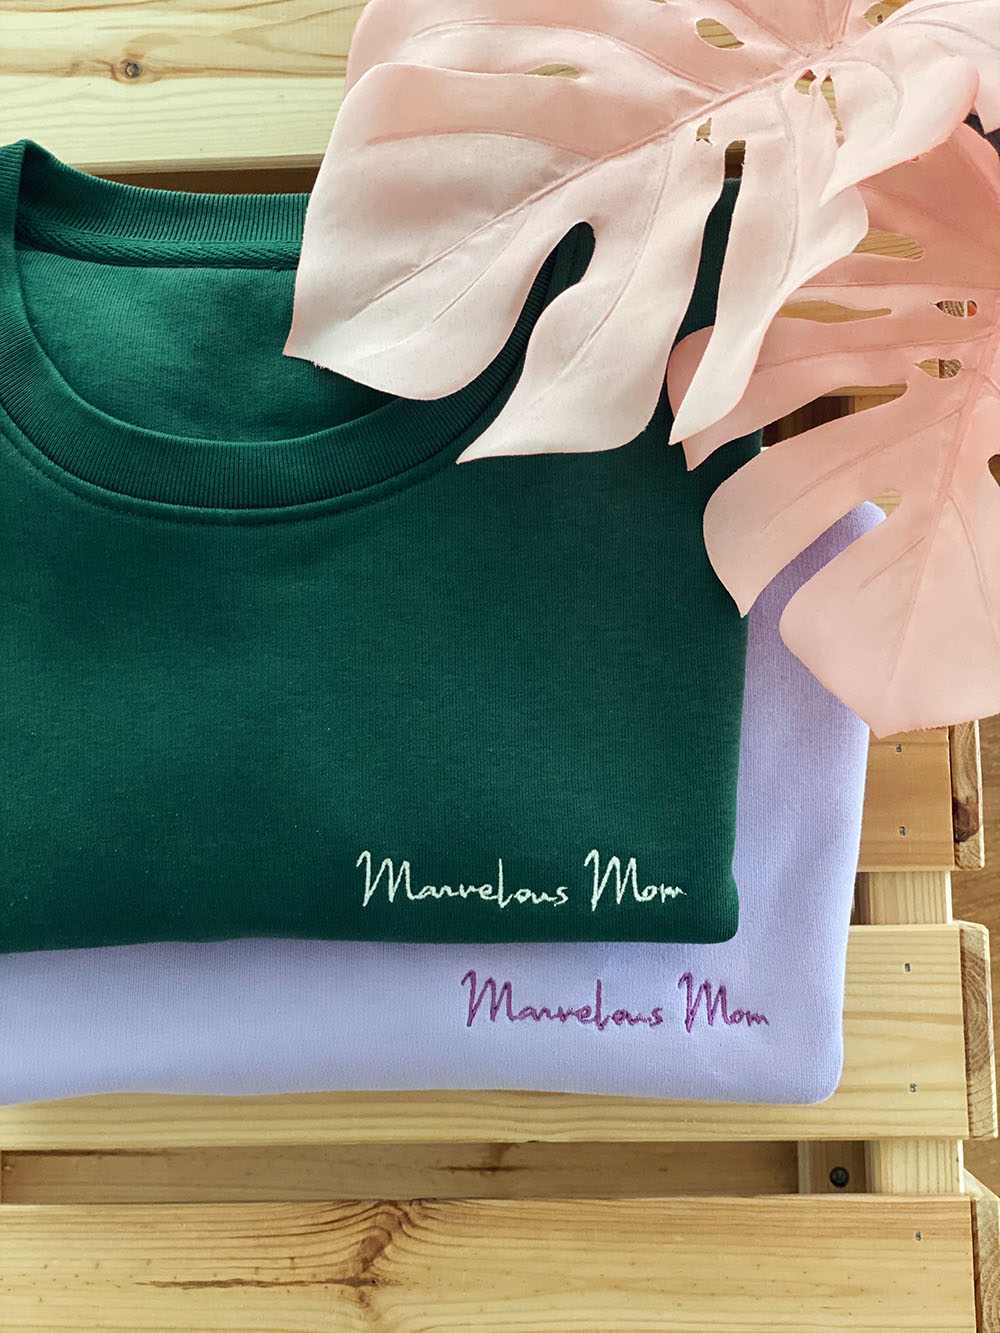 Marvelous Mom sweater by Mangos on Monday